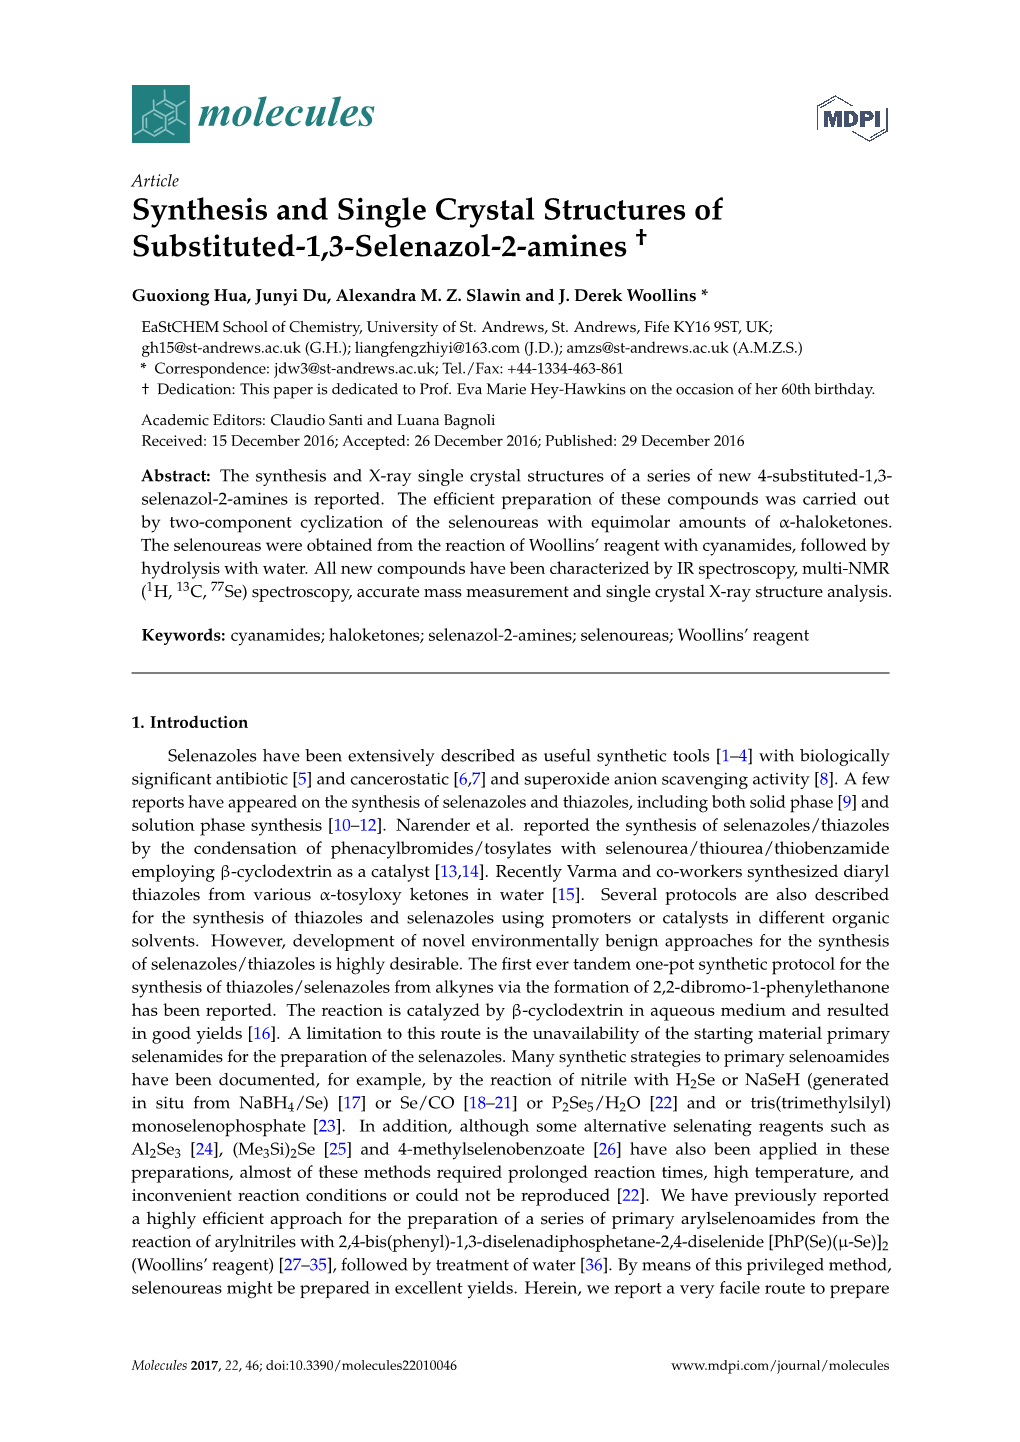 Synthesis and Single Crystal Structures of Substituted-1, 3